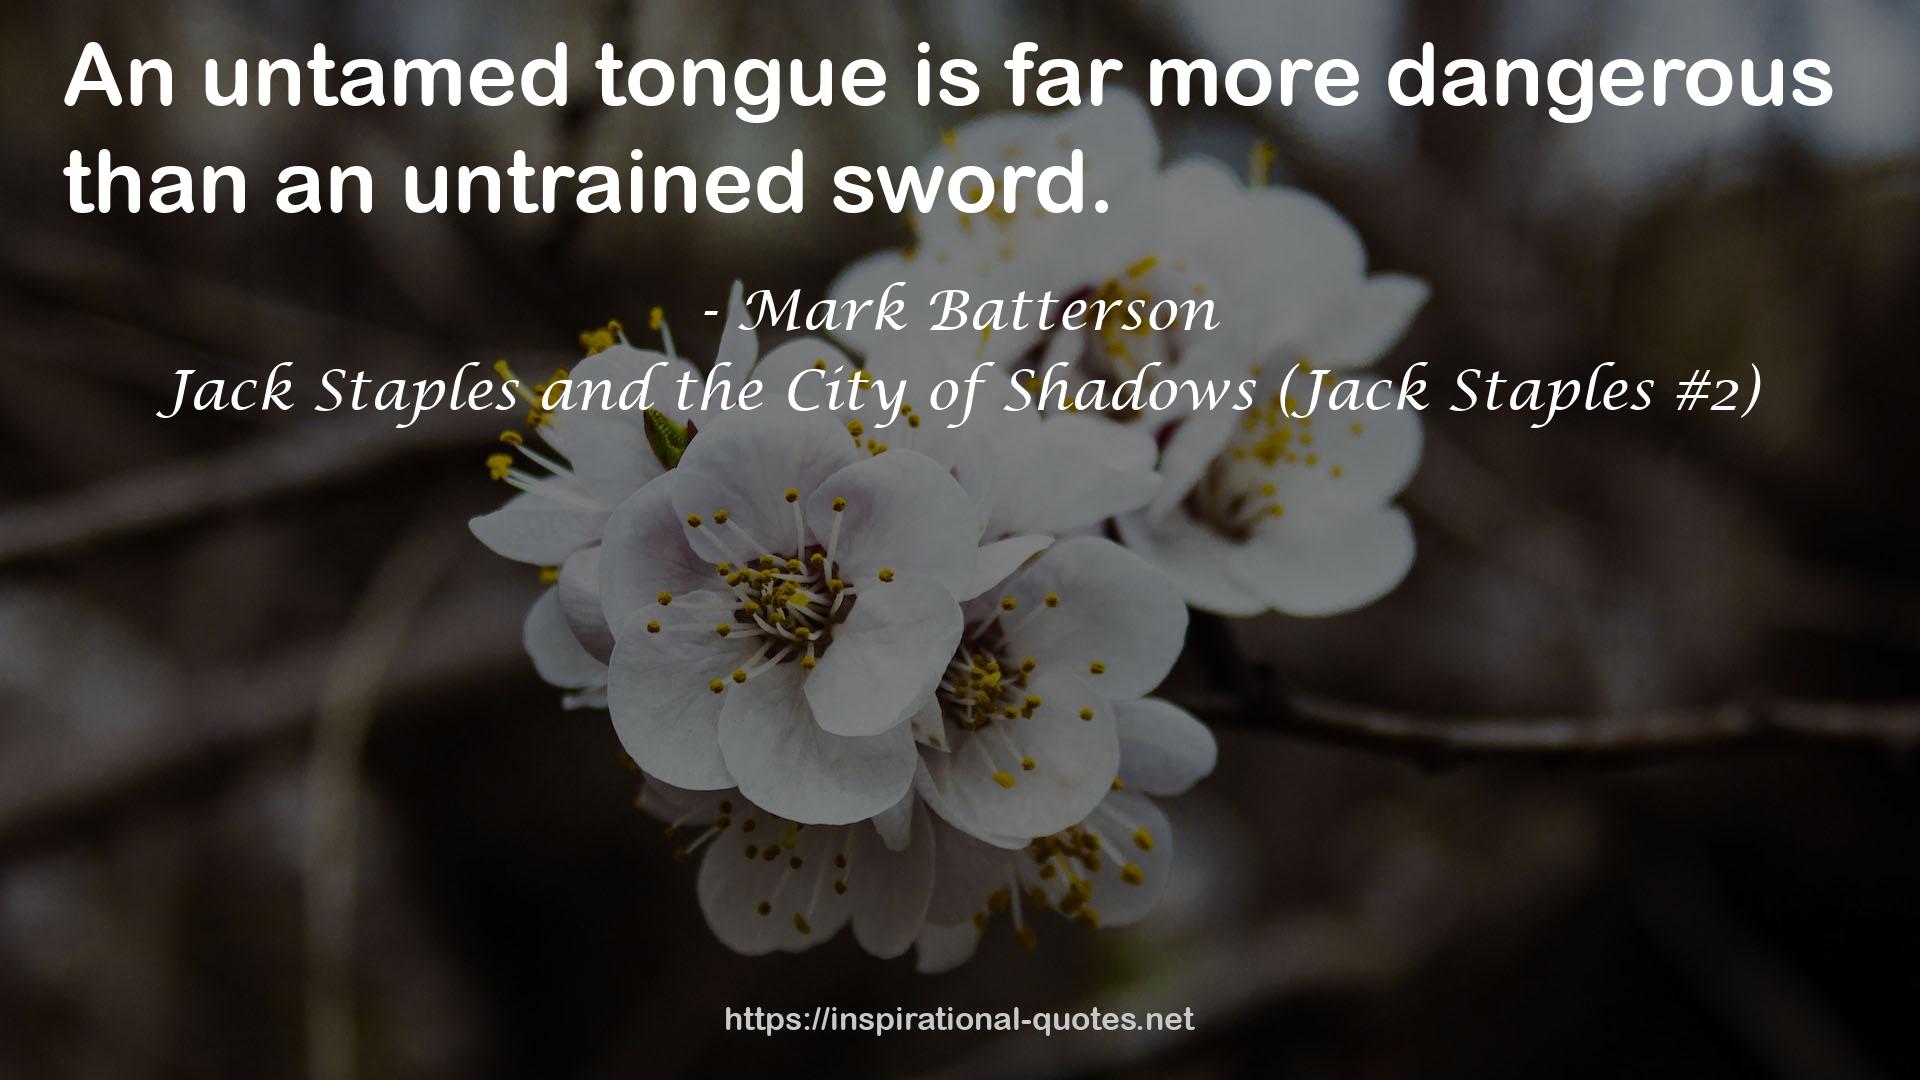 Jack Staples and the City of Shadows (Jack Staples #2) QUOTES